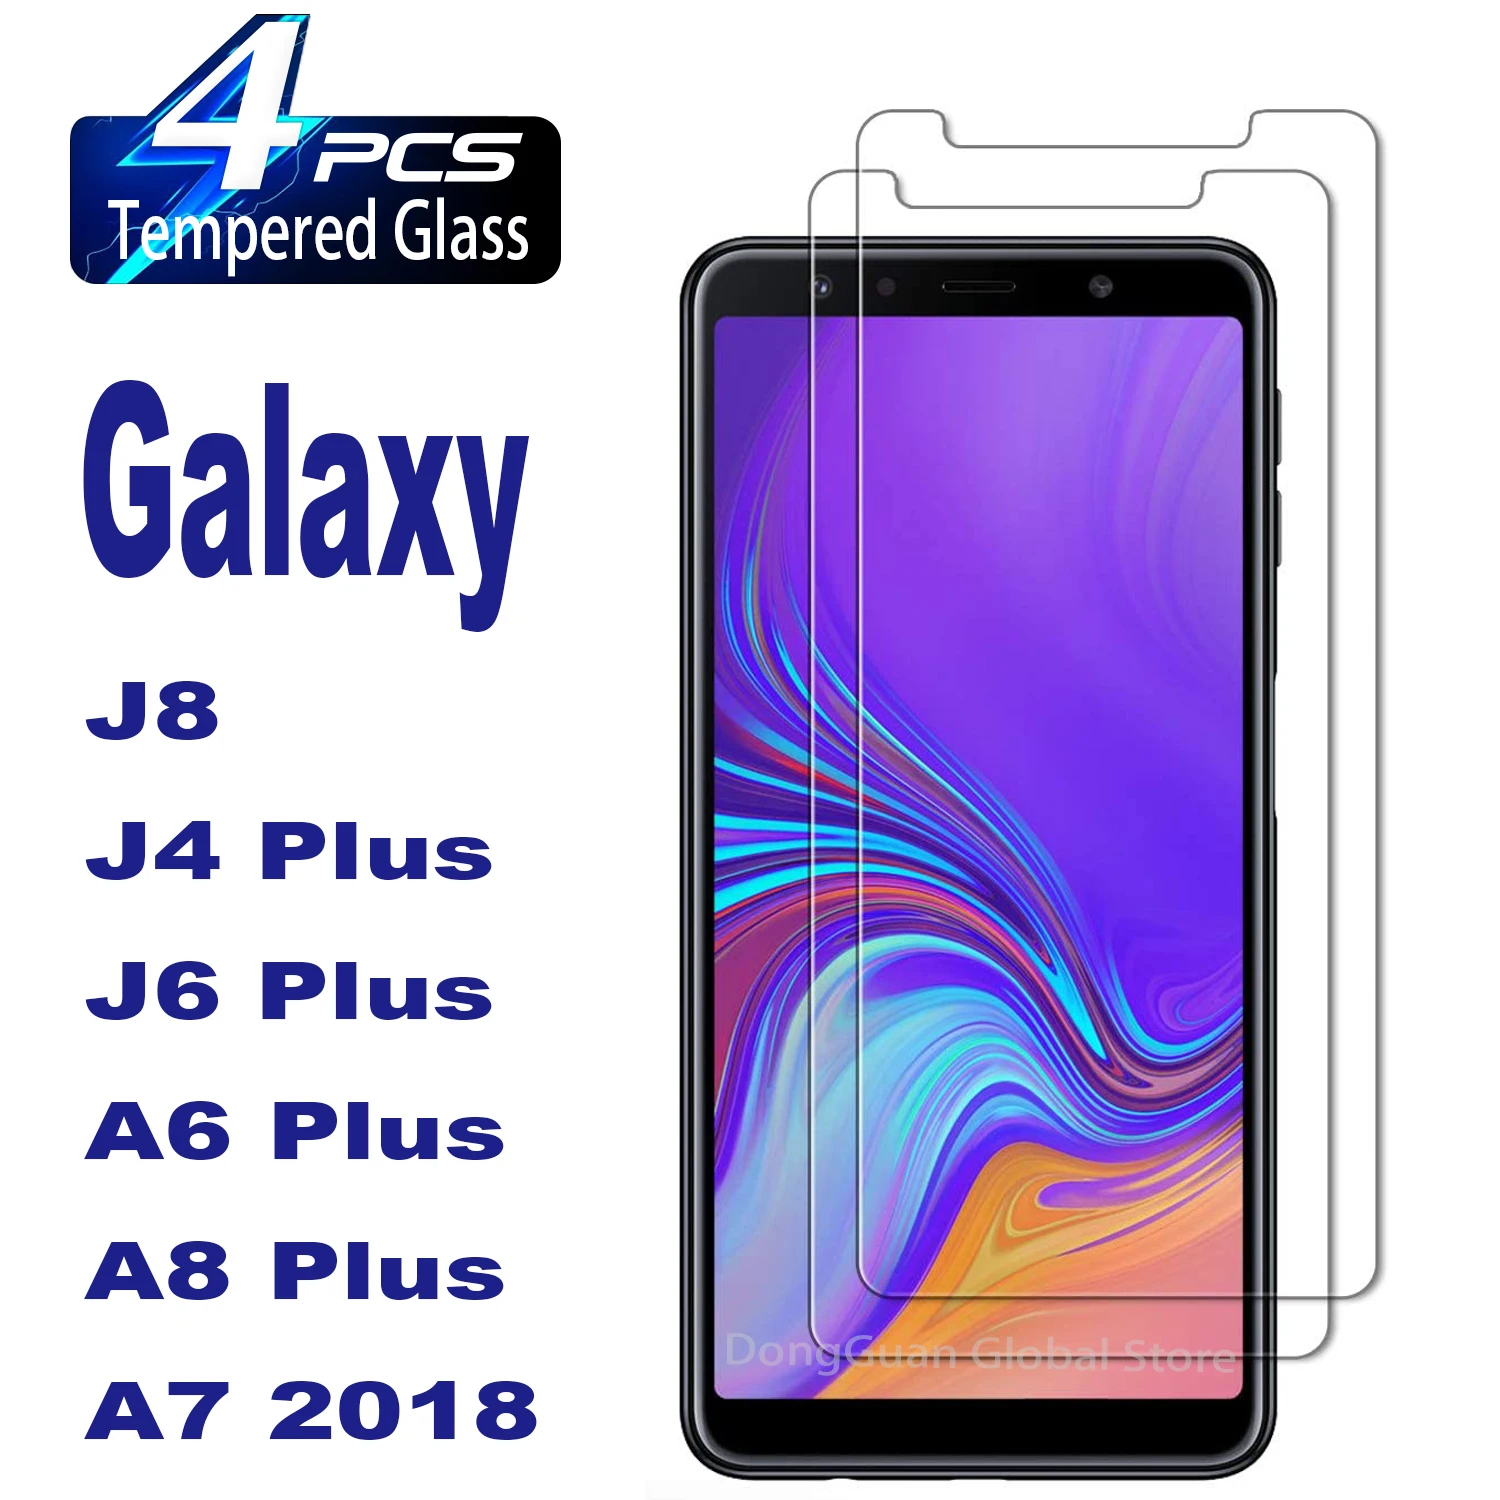 

4Pcs Tempered Glass For Samsung Galaxy J8 J4+ J6+ A6+ A8+ A7 2018 Screen Protector Glass